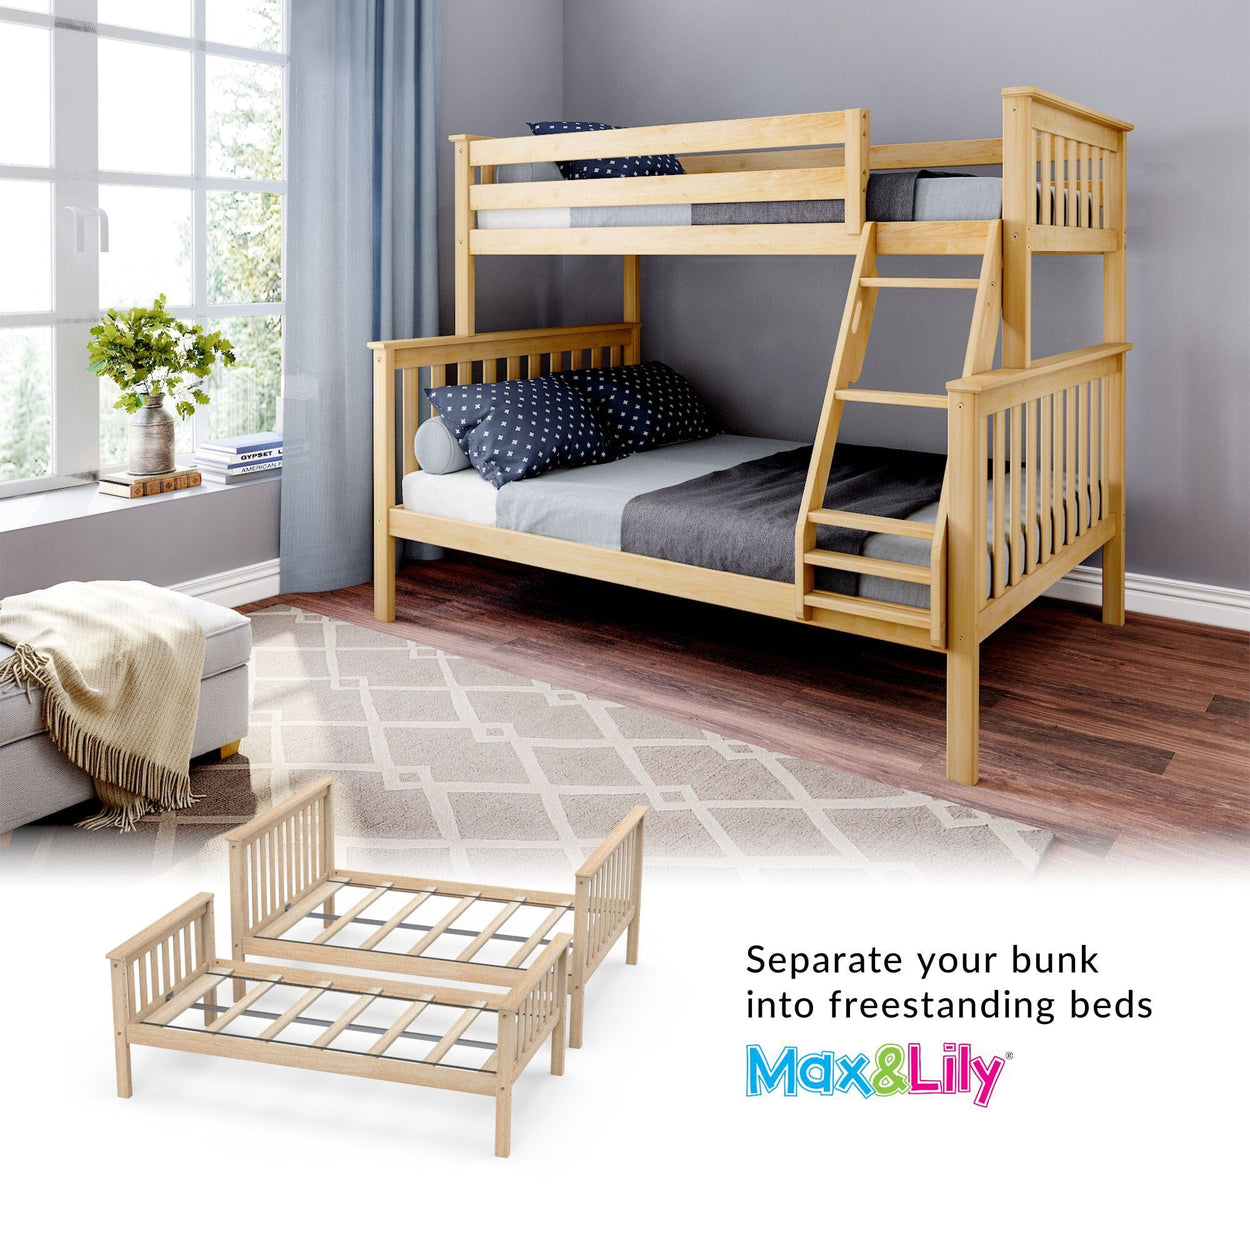 180231-001 : Bunk Beds Classic Twin over Full Bunk Bed, Natural